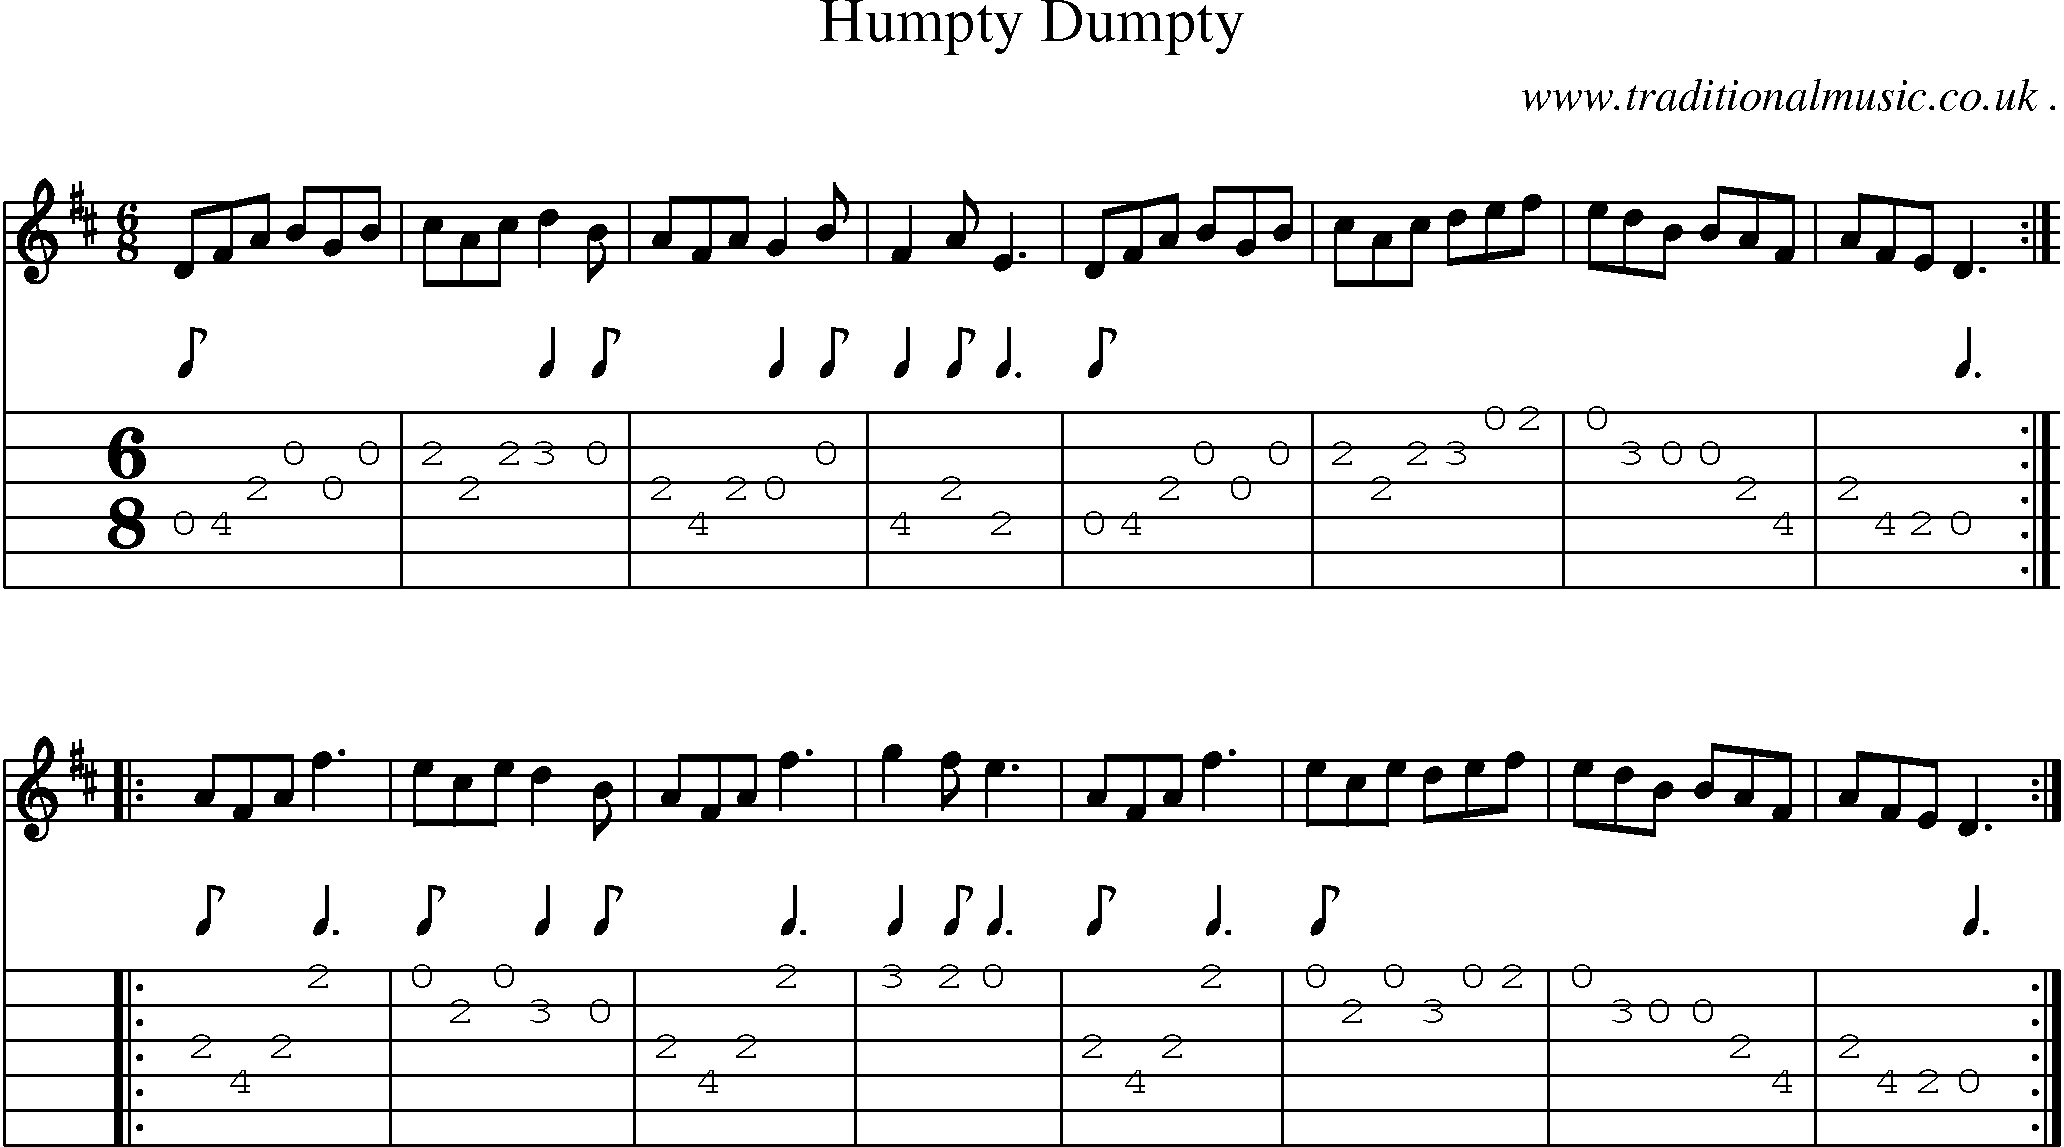 Sheet-Music and Guitar Tabs for Humpty Dumpty